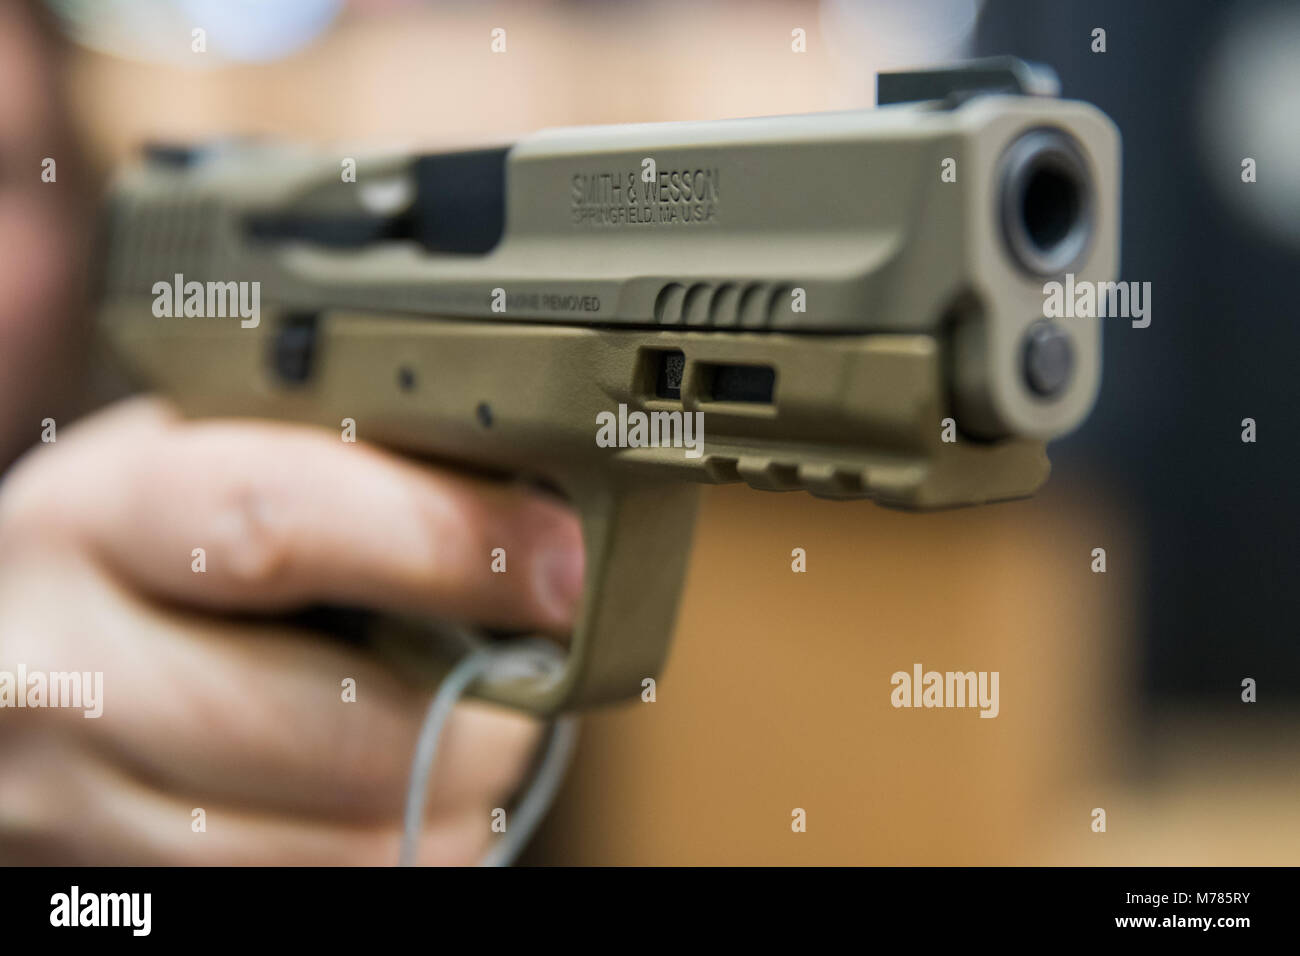 09 March 2018, Germany, Nuremberg: A woman holding a 9 millimetre handgun by the American manufacturer Smith & Wesson (S&W) at the IWA OutdoorClassics trade show for hunting, shooting sports, equipment for outdoor activities and for civilian and official security applications. Photo: Daniel Karmann/dpa Stock Photo